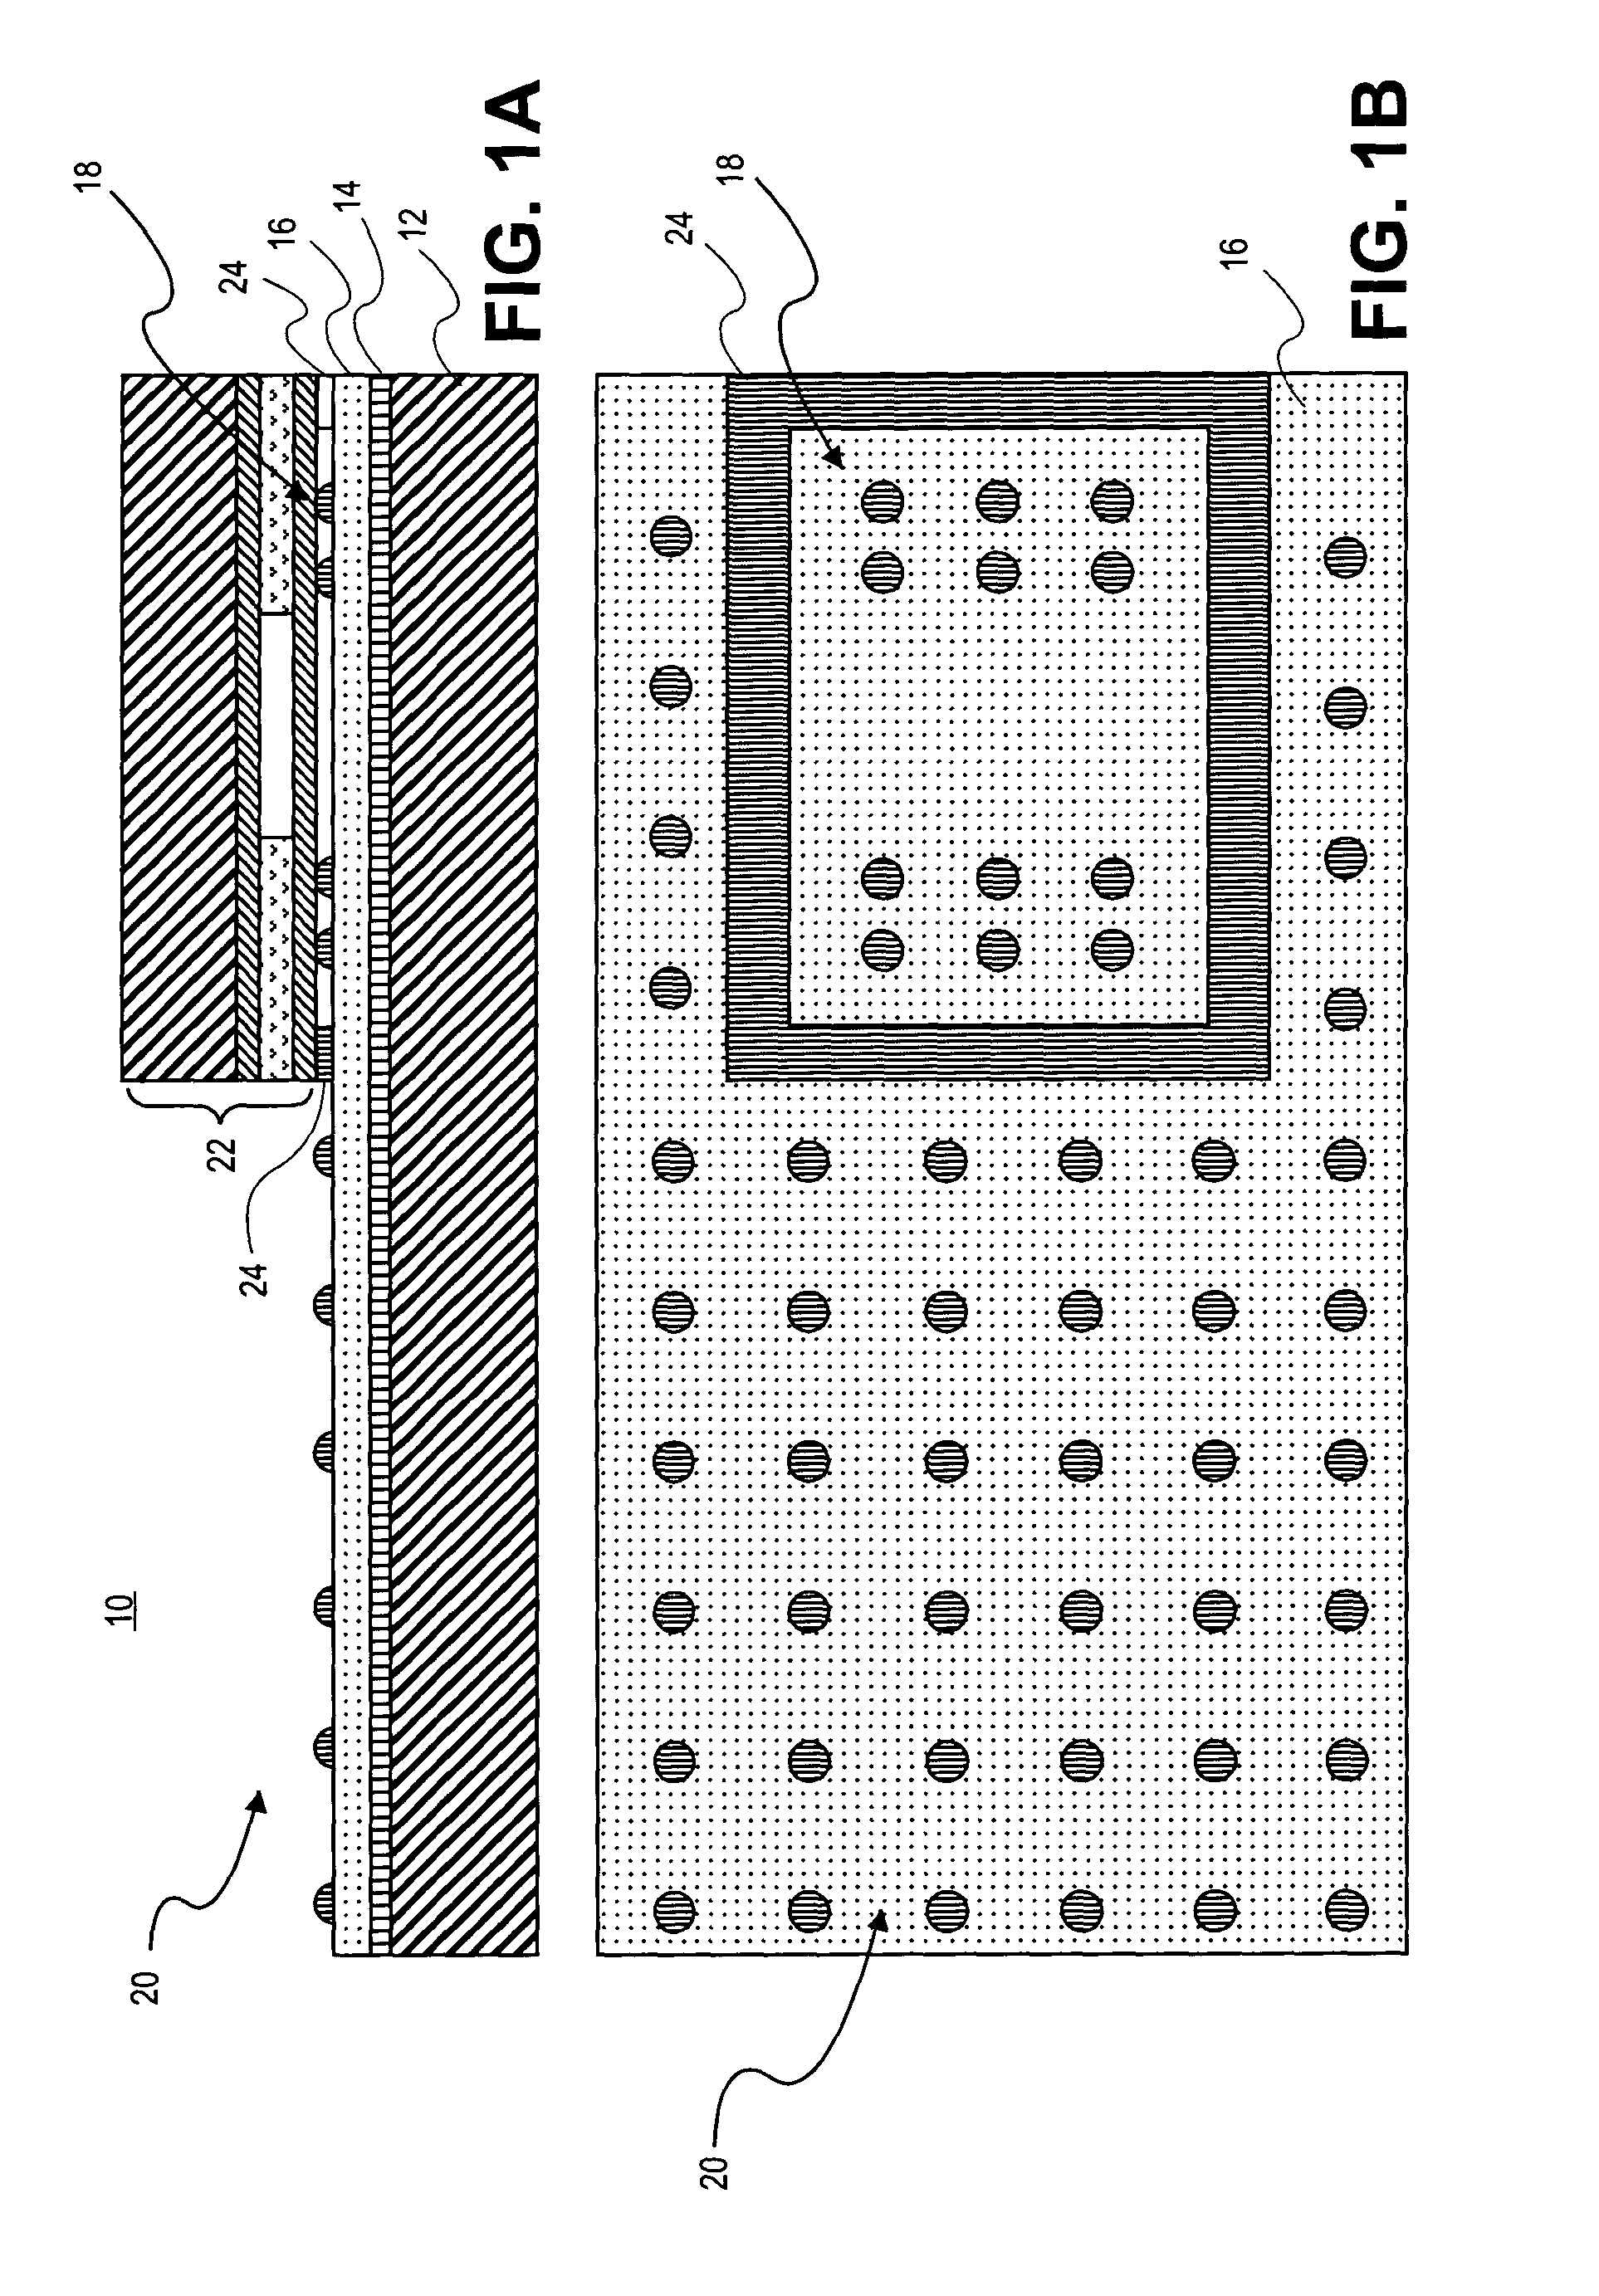 MEMS device integrated chip package, and method of making same